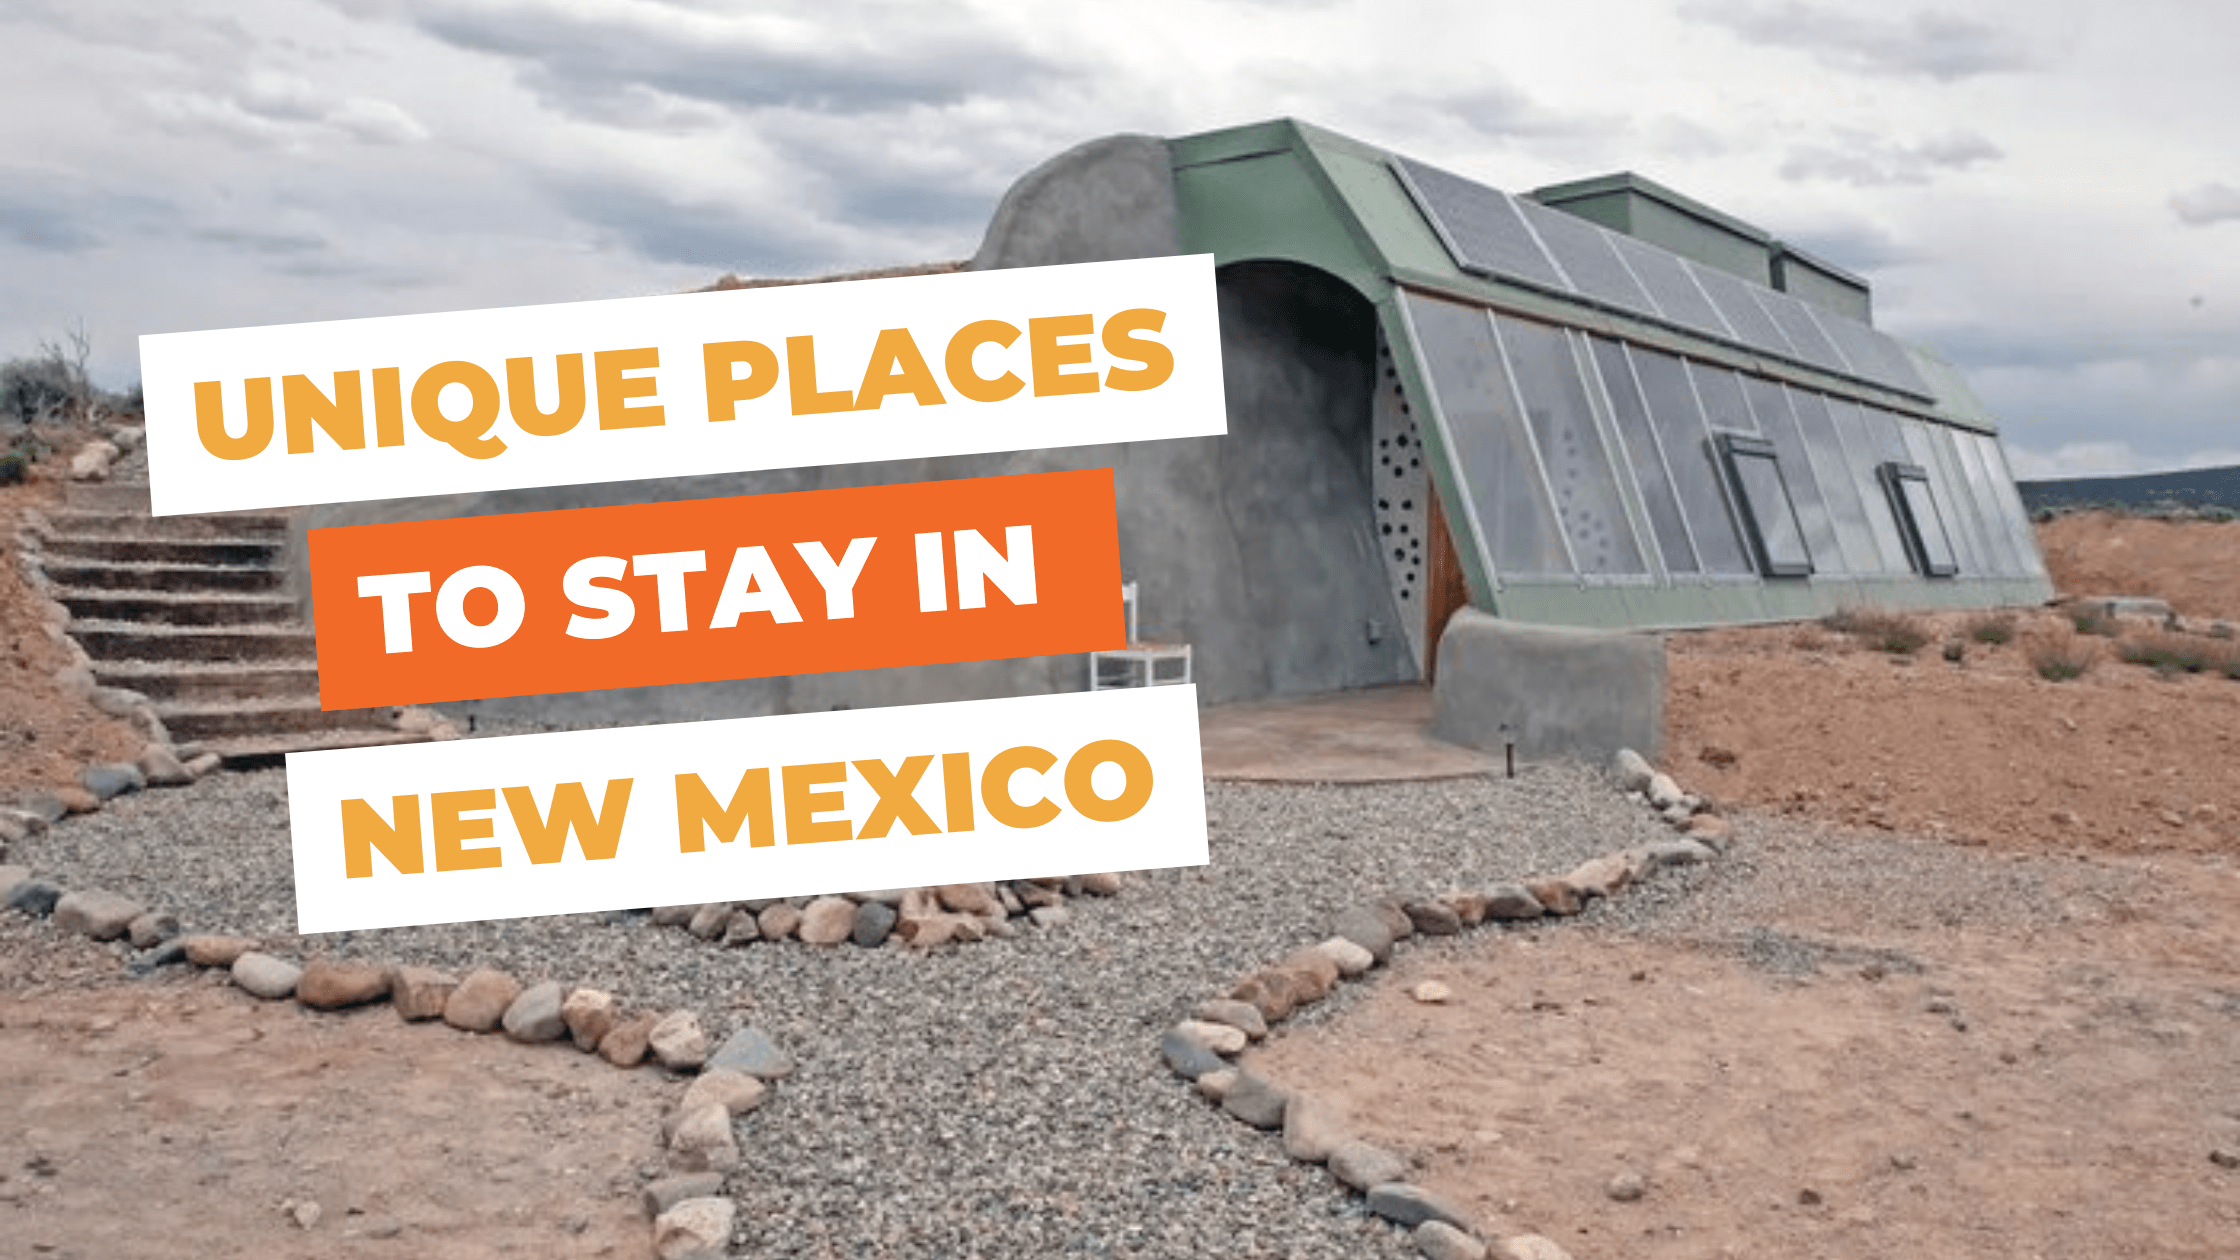 These 9 Unique Places To Stay In New Mexico Will Give You An Unforgettable Experience